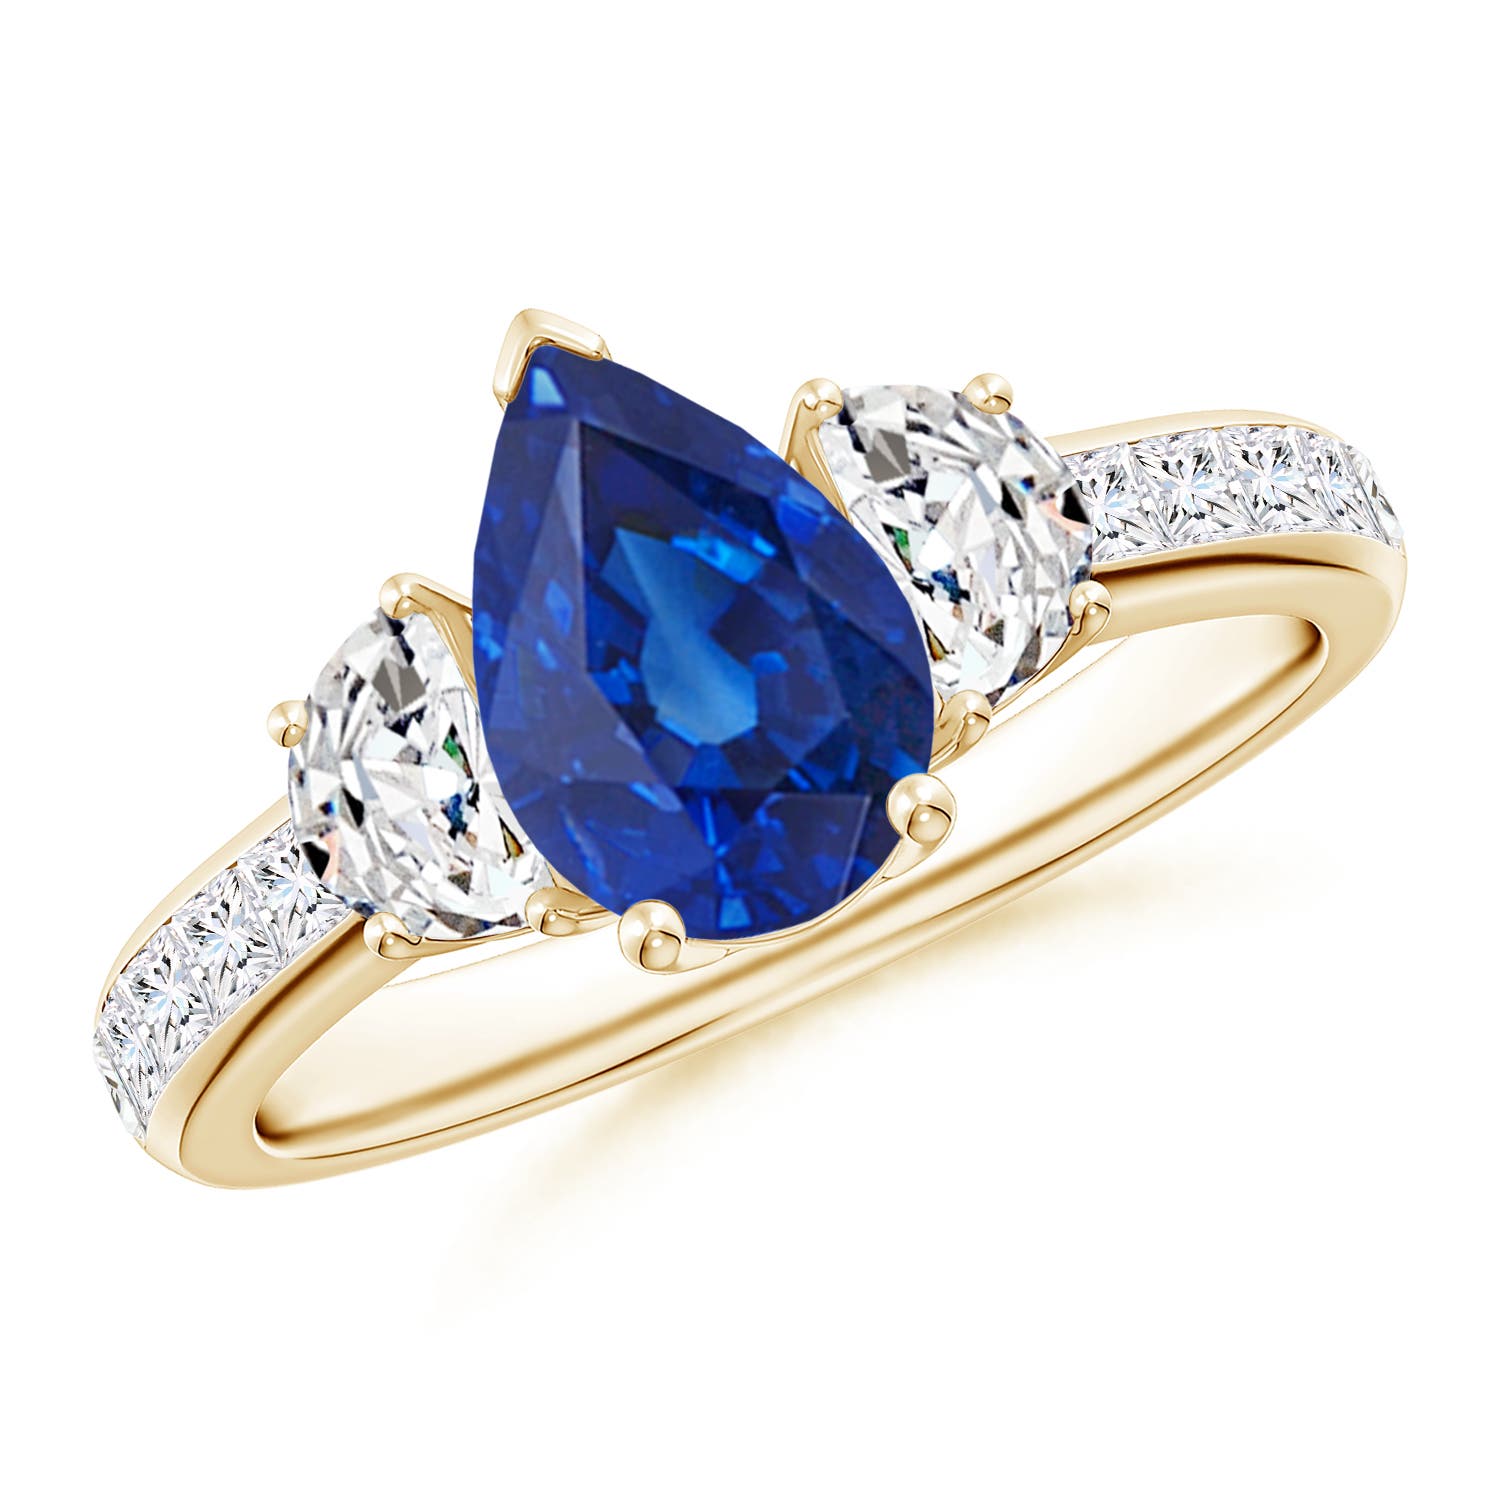 AAA - Blue Sapphire / 2.48 CT / 14 KT Yellow Gold